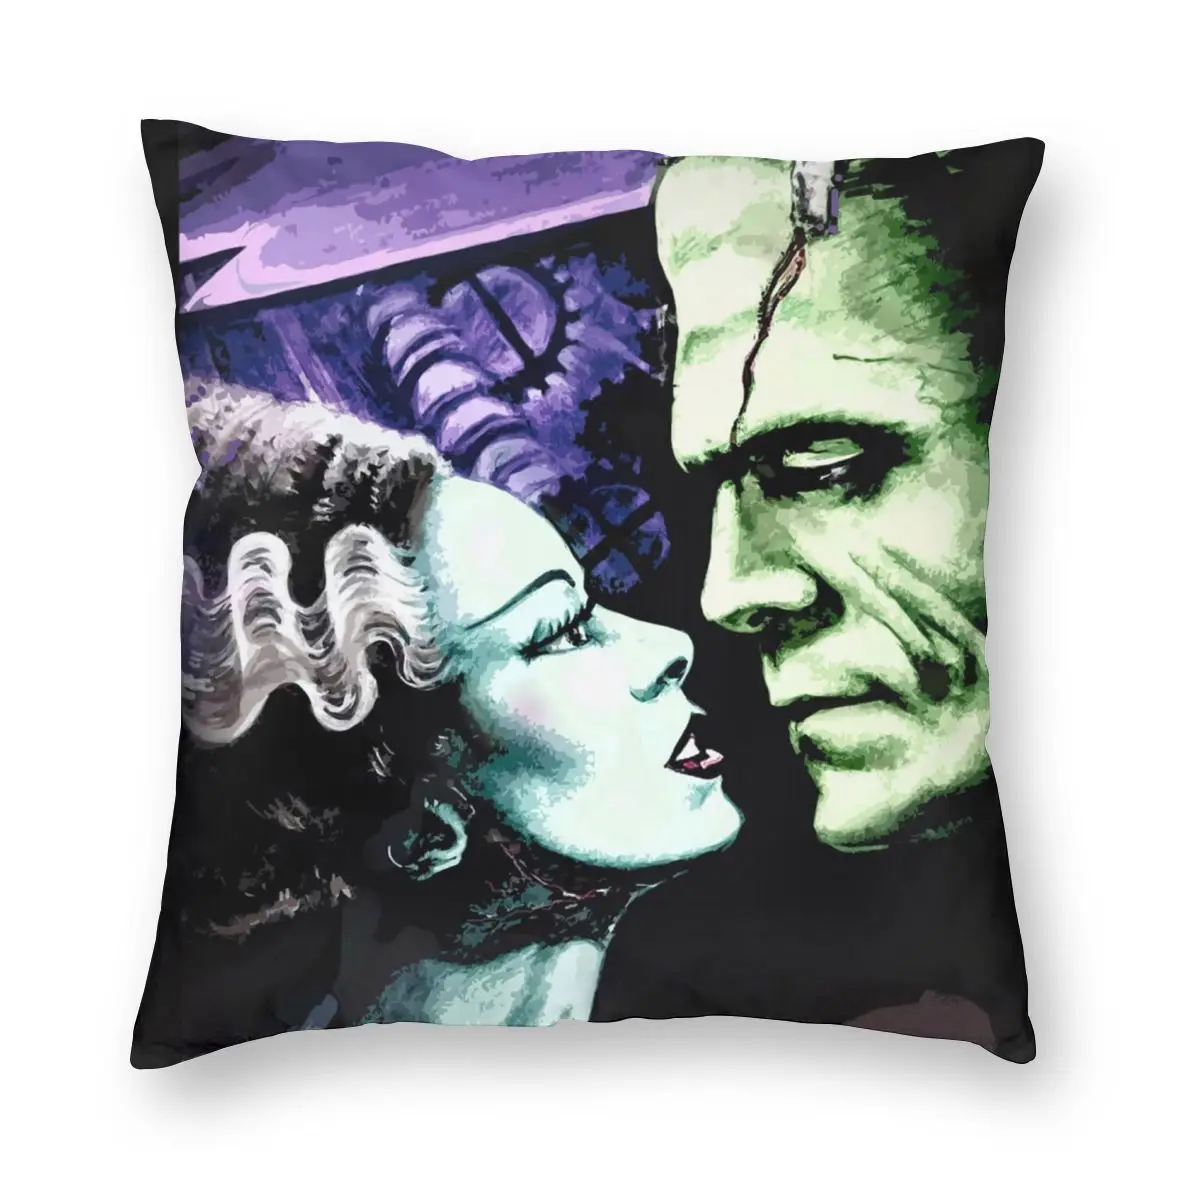 

Bride & Frankie Monsters In Love Pillowcase Printing Polyester Cushion Cover Karloff Frankenstein Throw Pillow Case Cover 18''